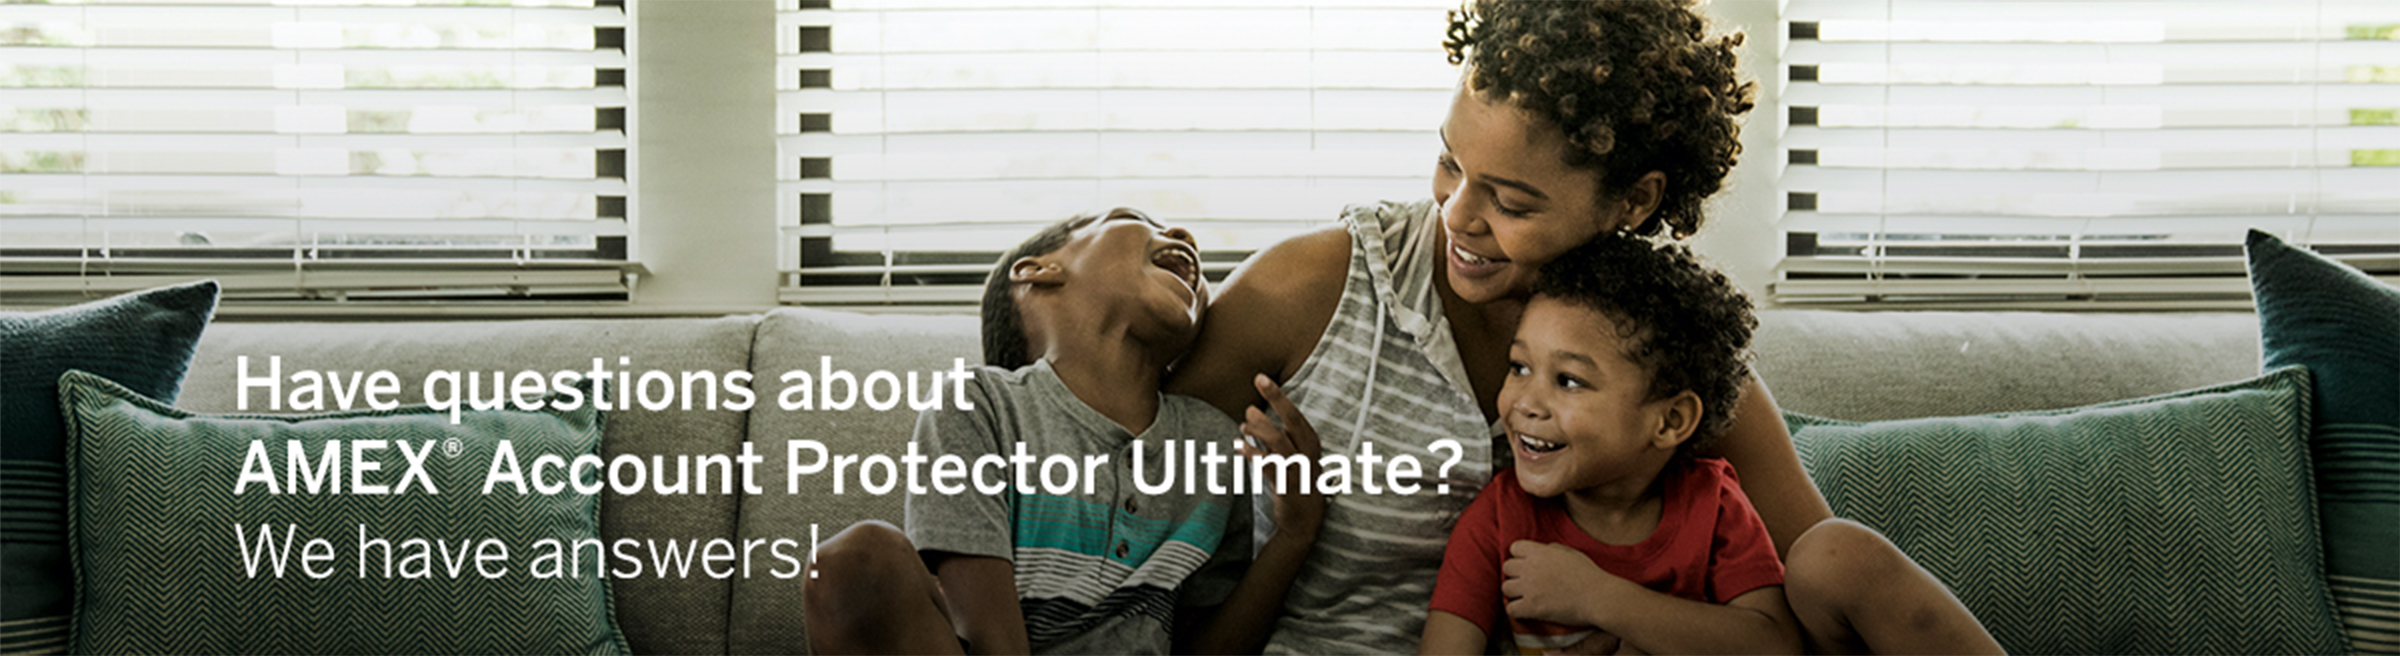 Have questions about AMEX Account Protector Ultimate? We have answers!